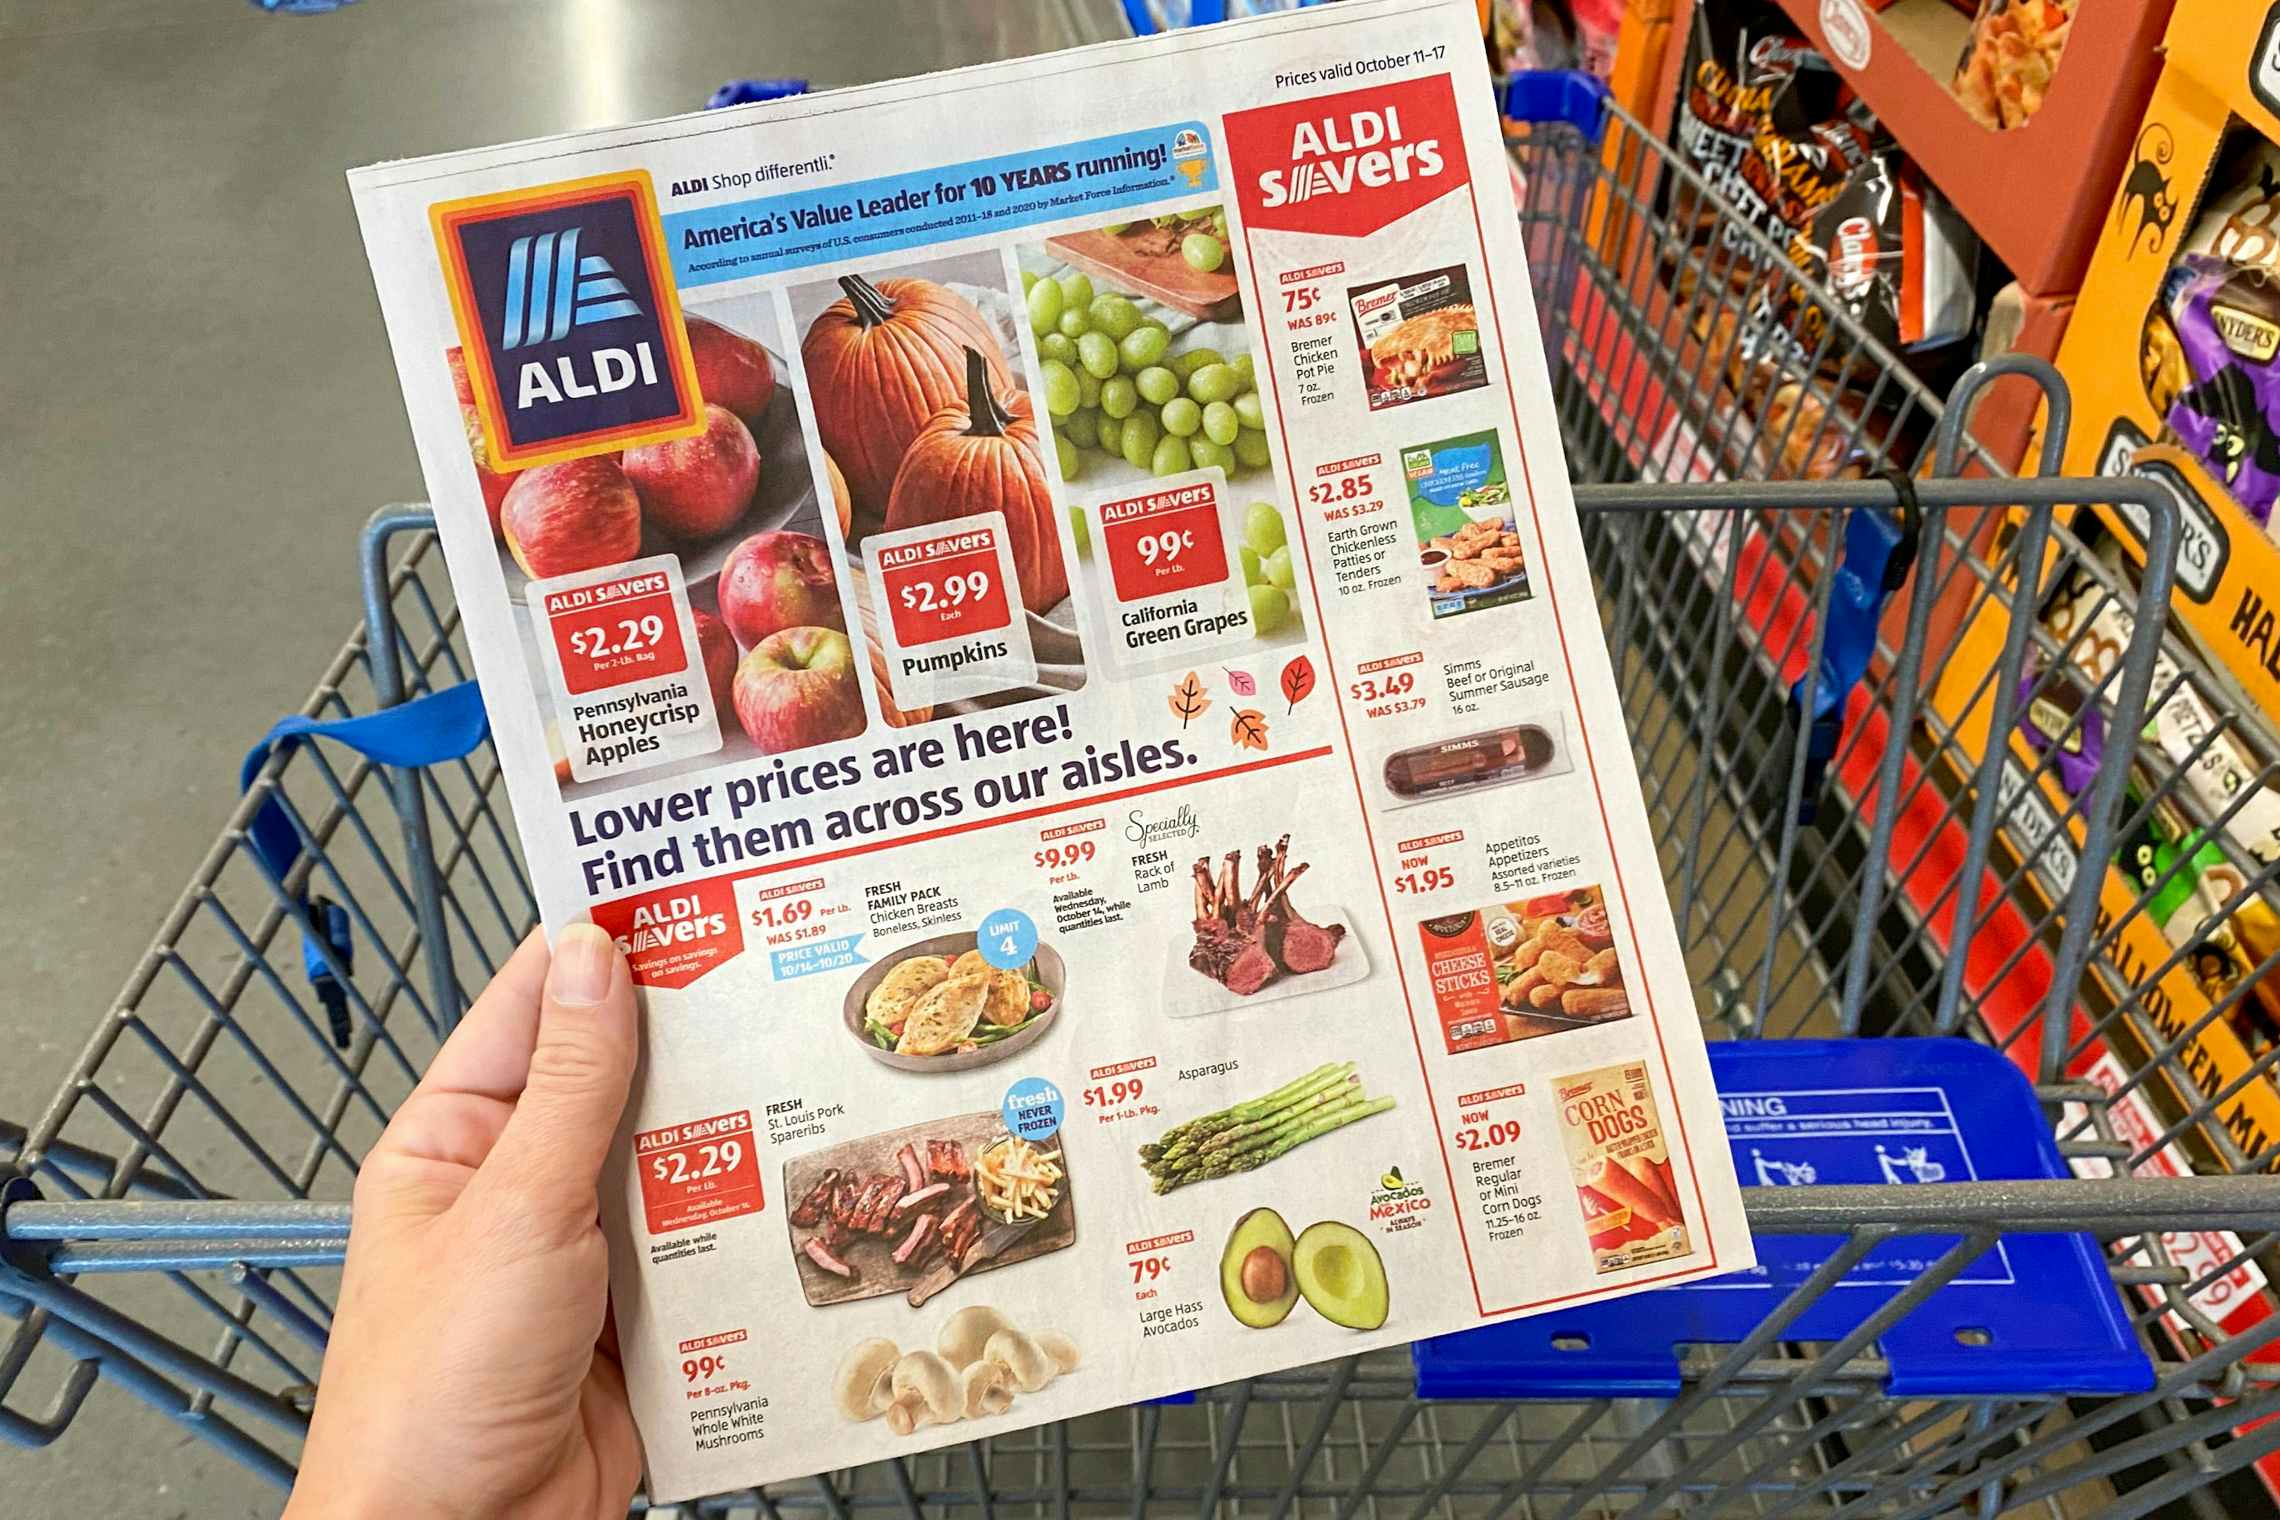 16 Brilliant Ways To Get the Best Deals at the Grocery Store Every Time